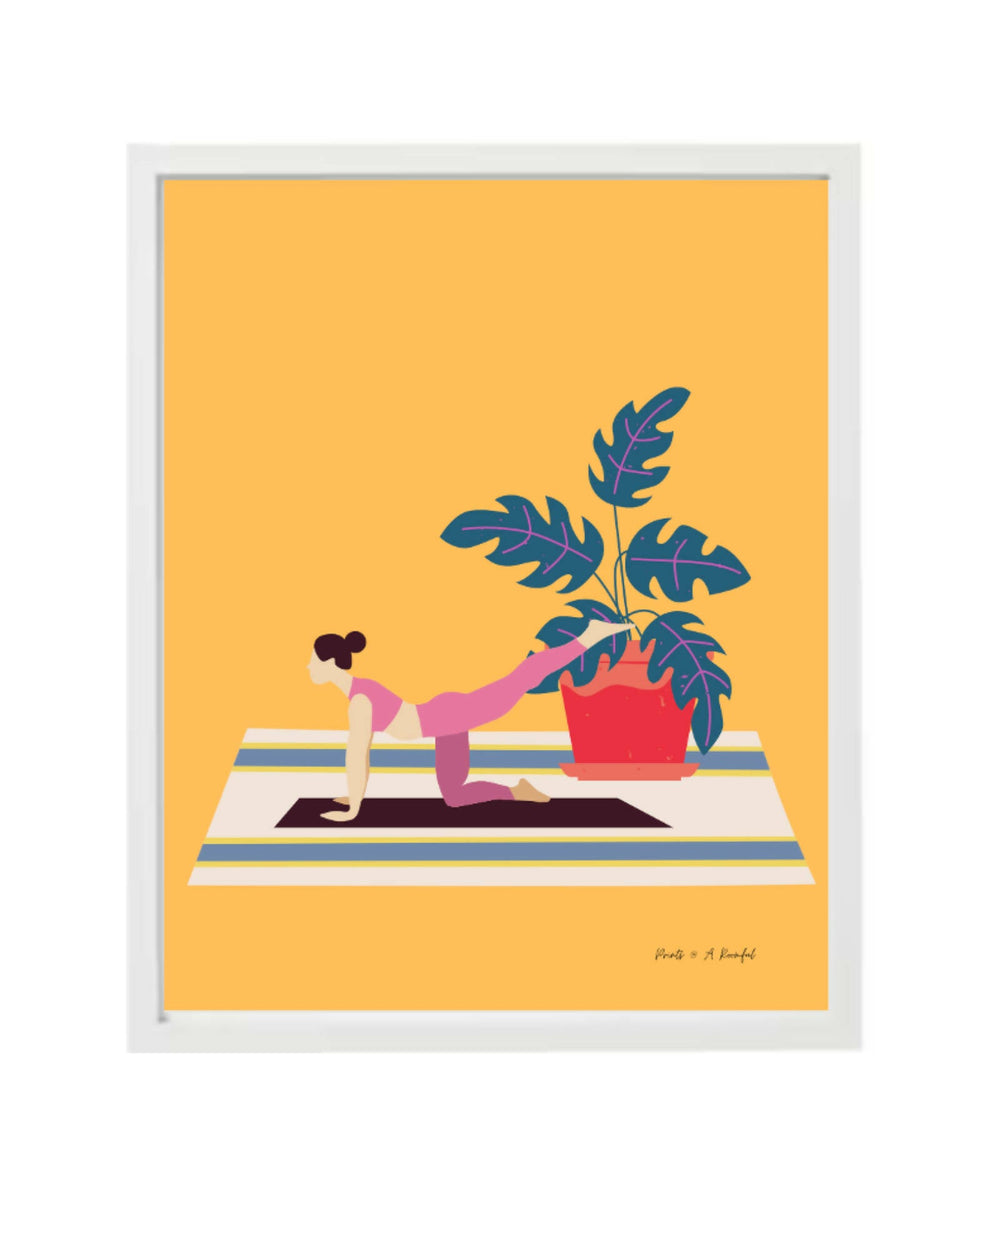 wall art : inspired by our yoga community (amber background) Art Prints@ARoomful 40cm x 50cm 